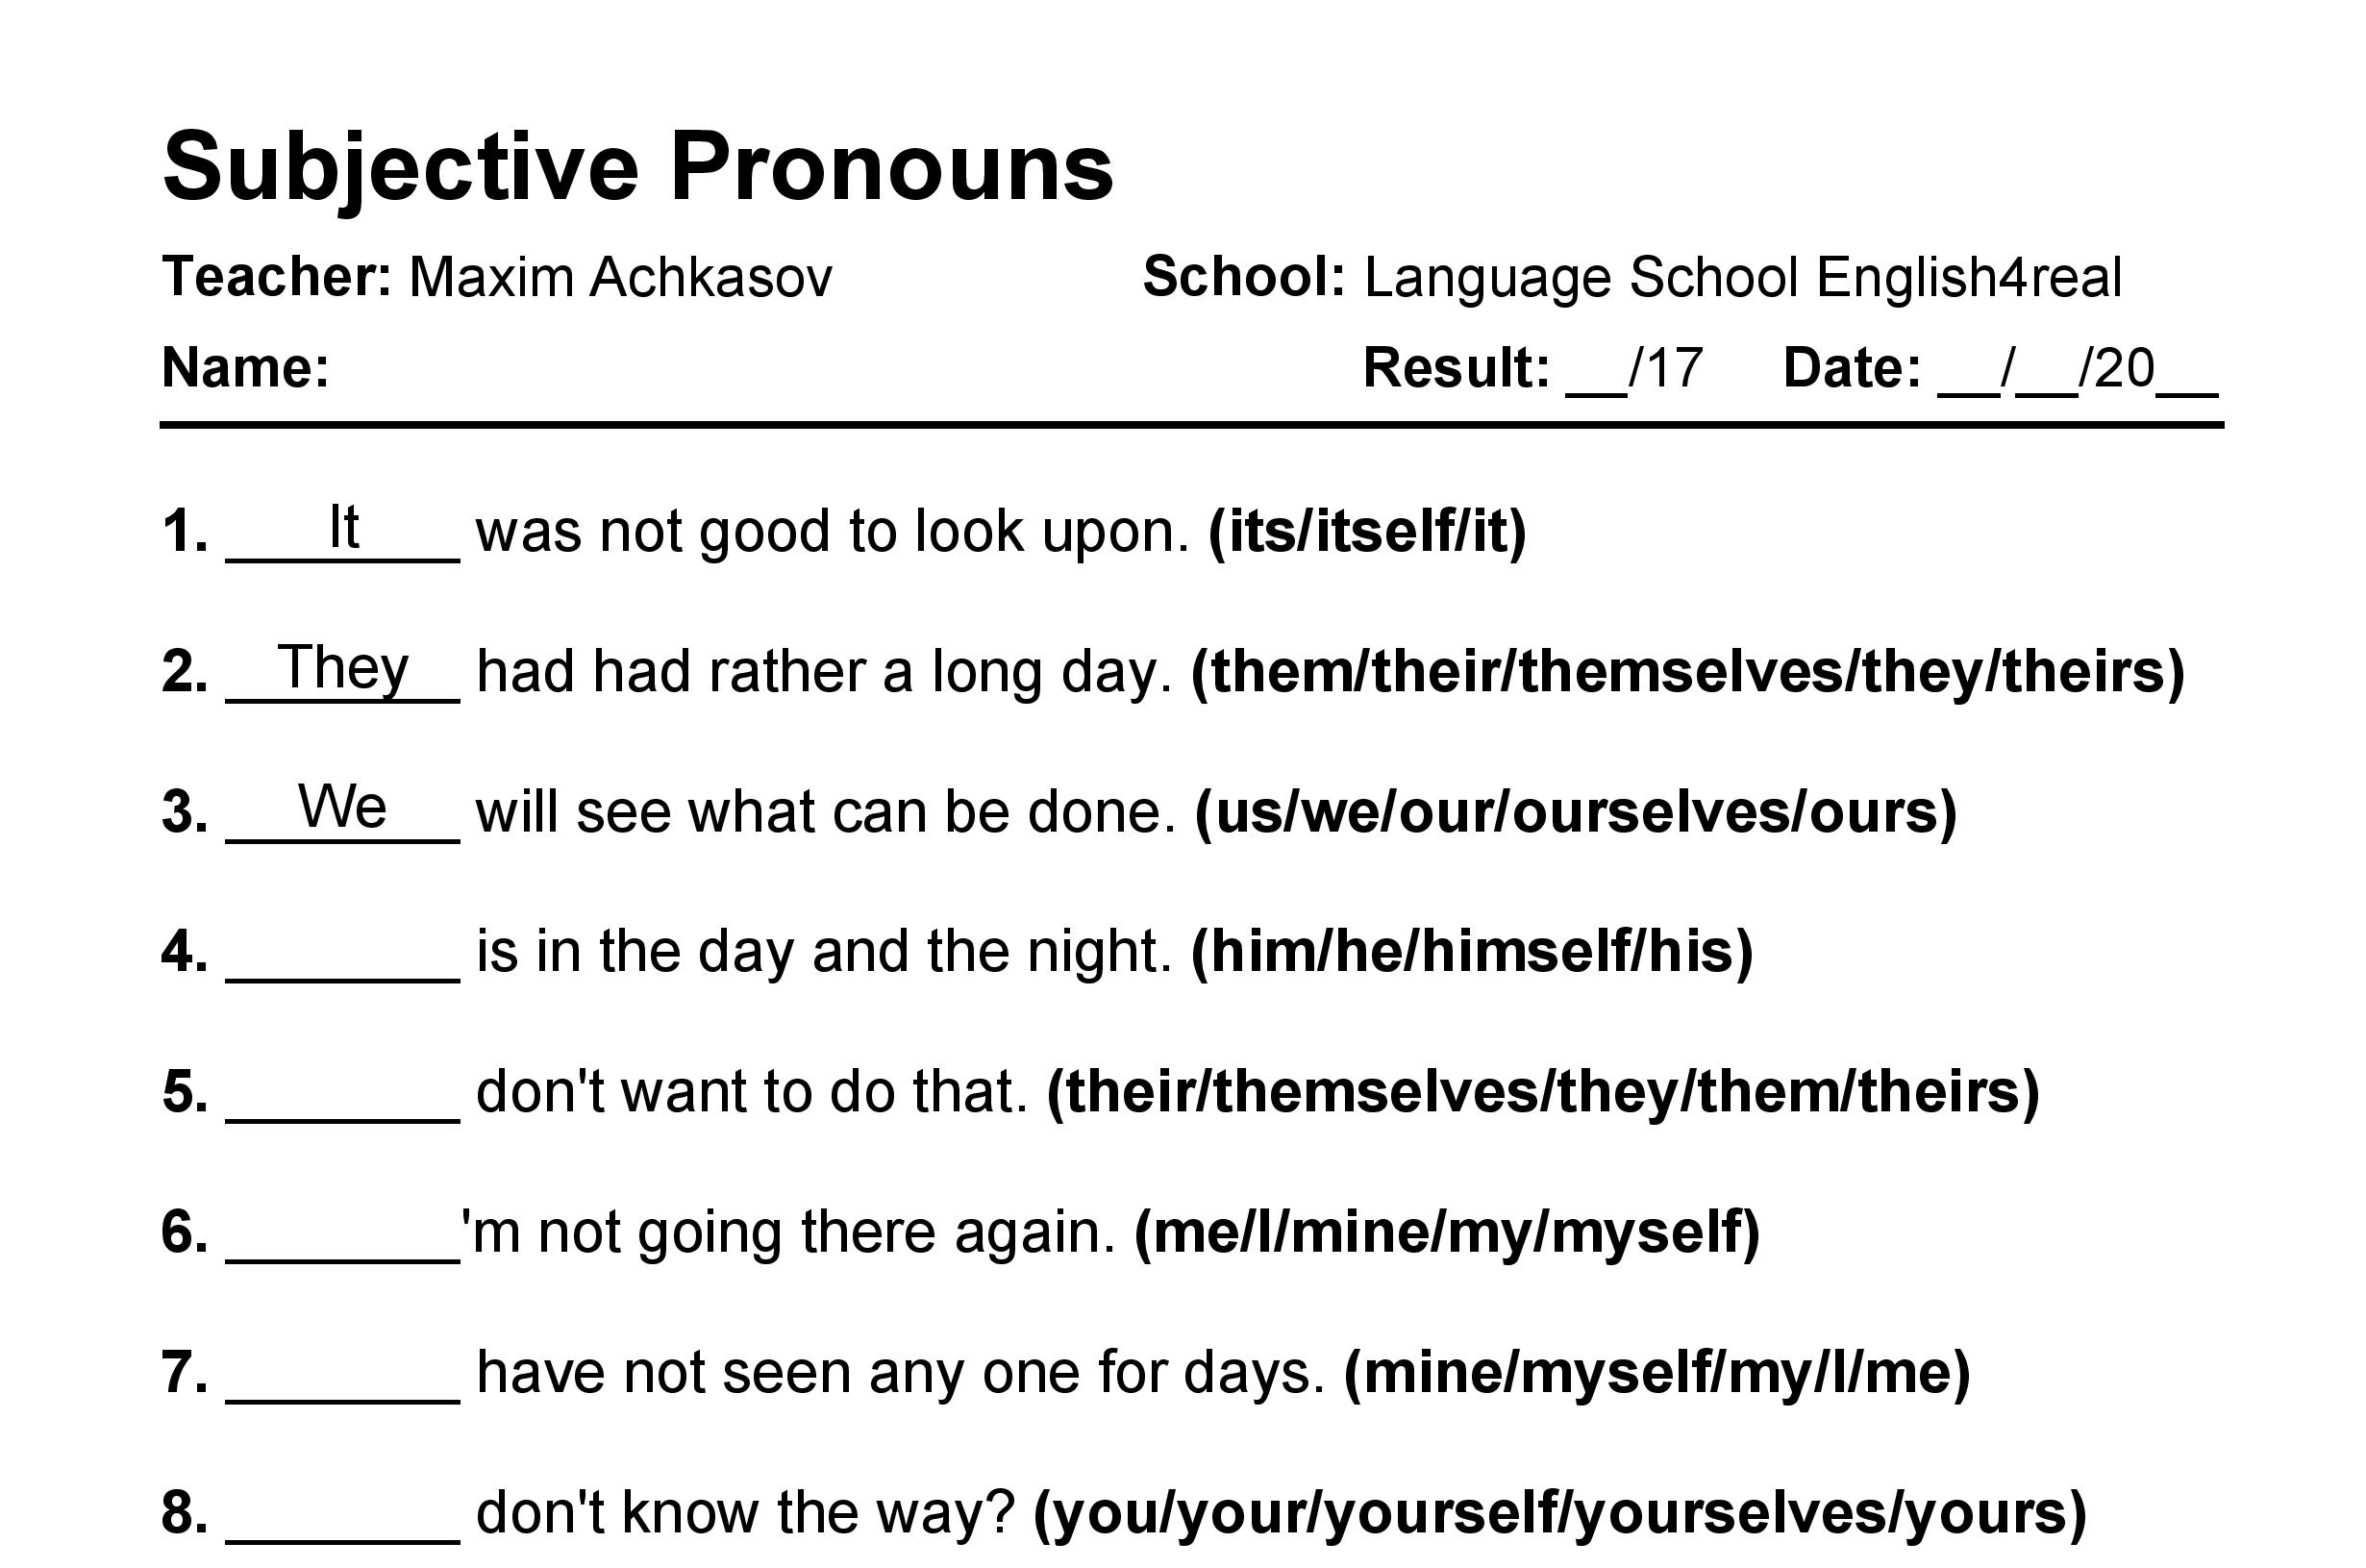 English grammar fill in the blanks exercises with answers in PDF - Subjective Pronouns